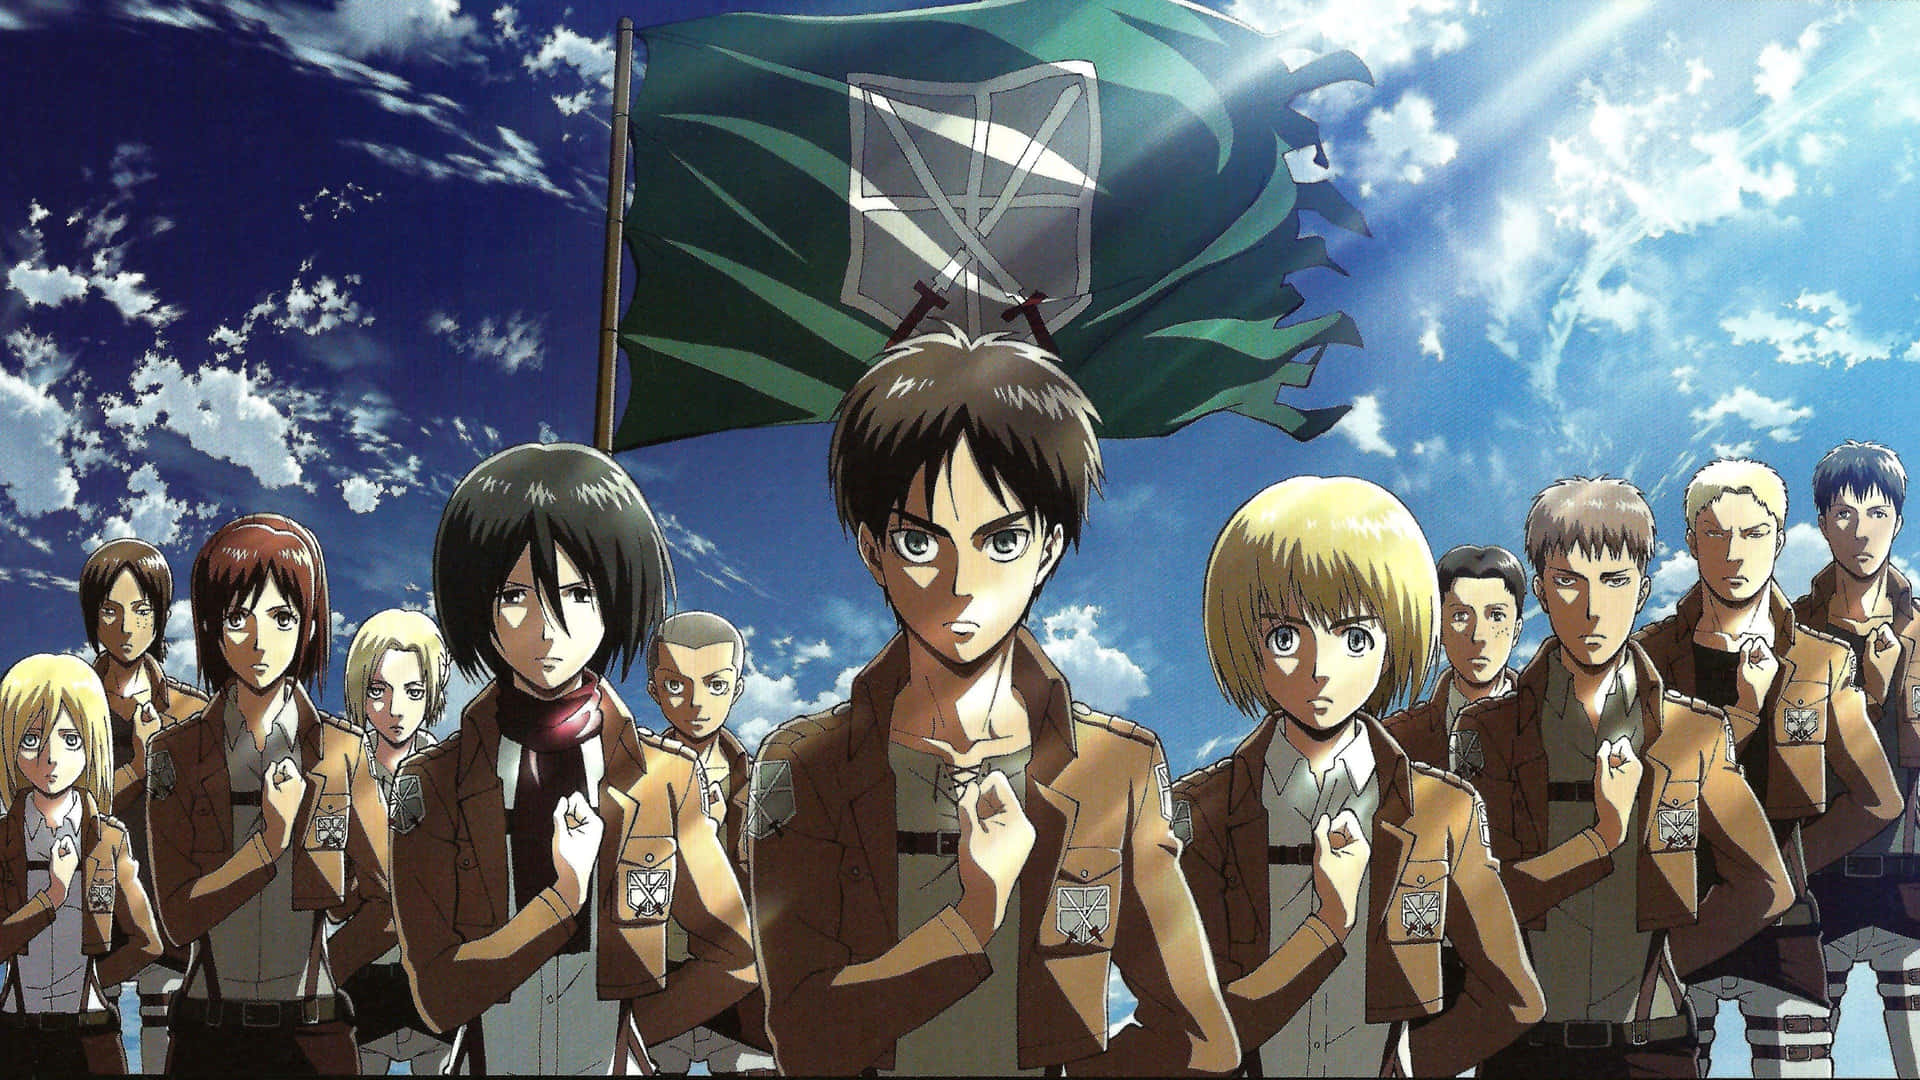 Survey Corps Members from Attack On Titan Ready to Face the Titans